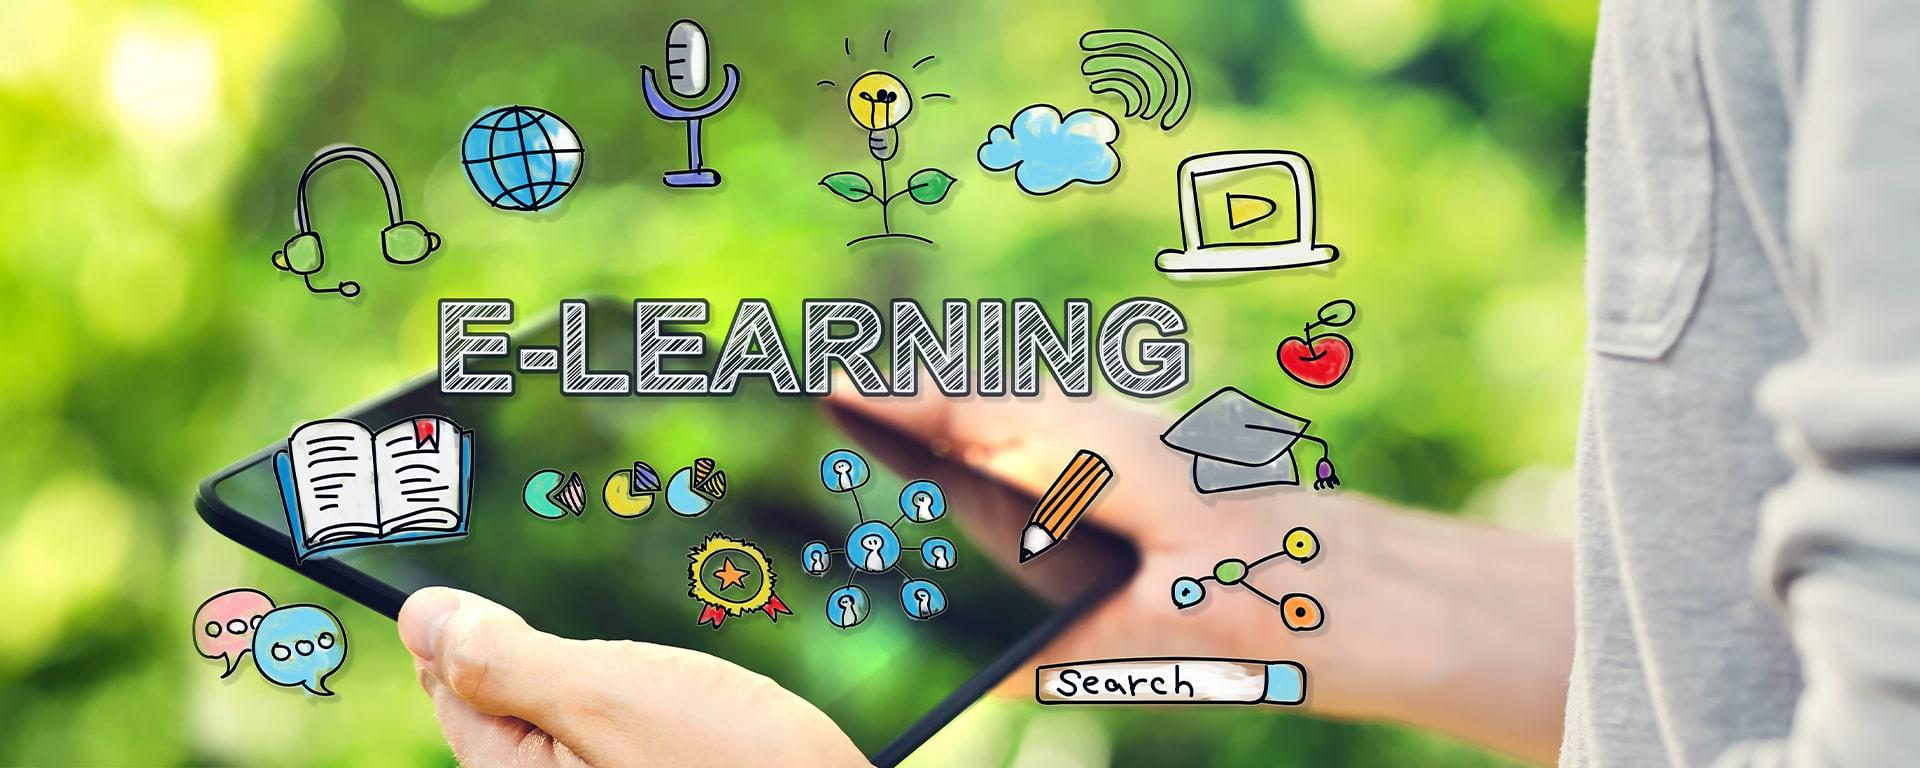 Elearning banner